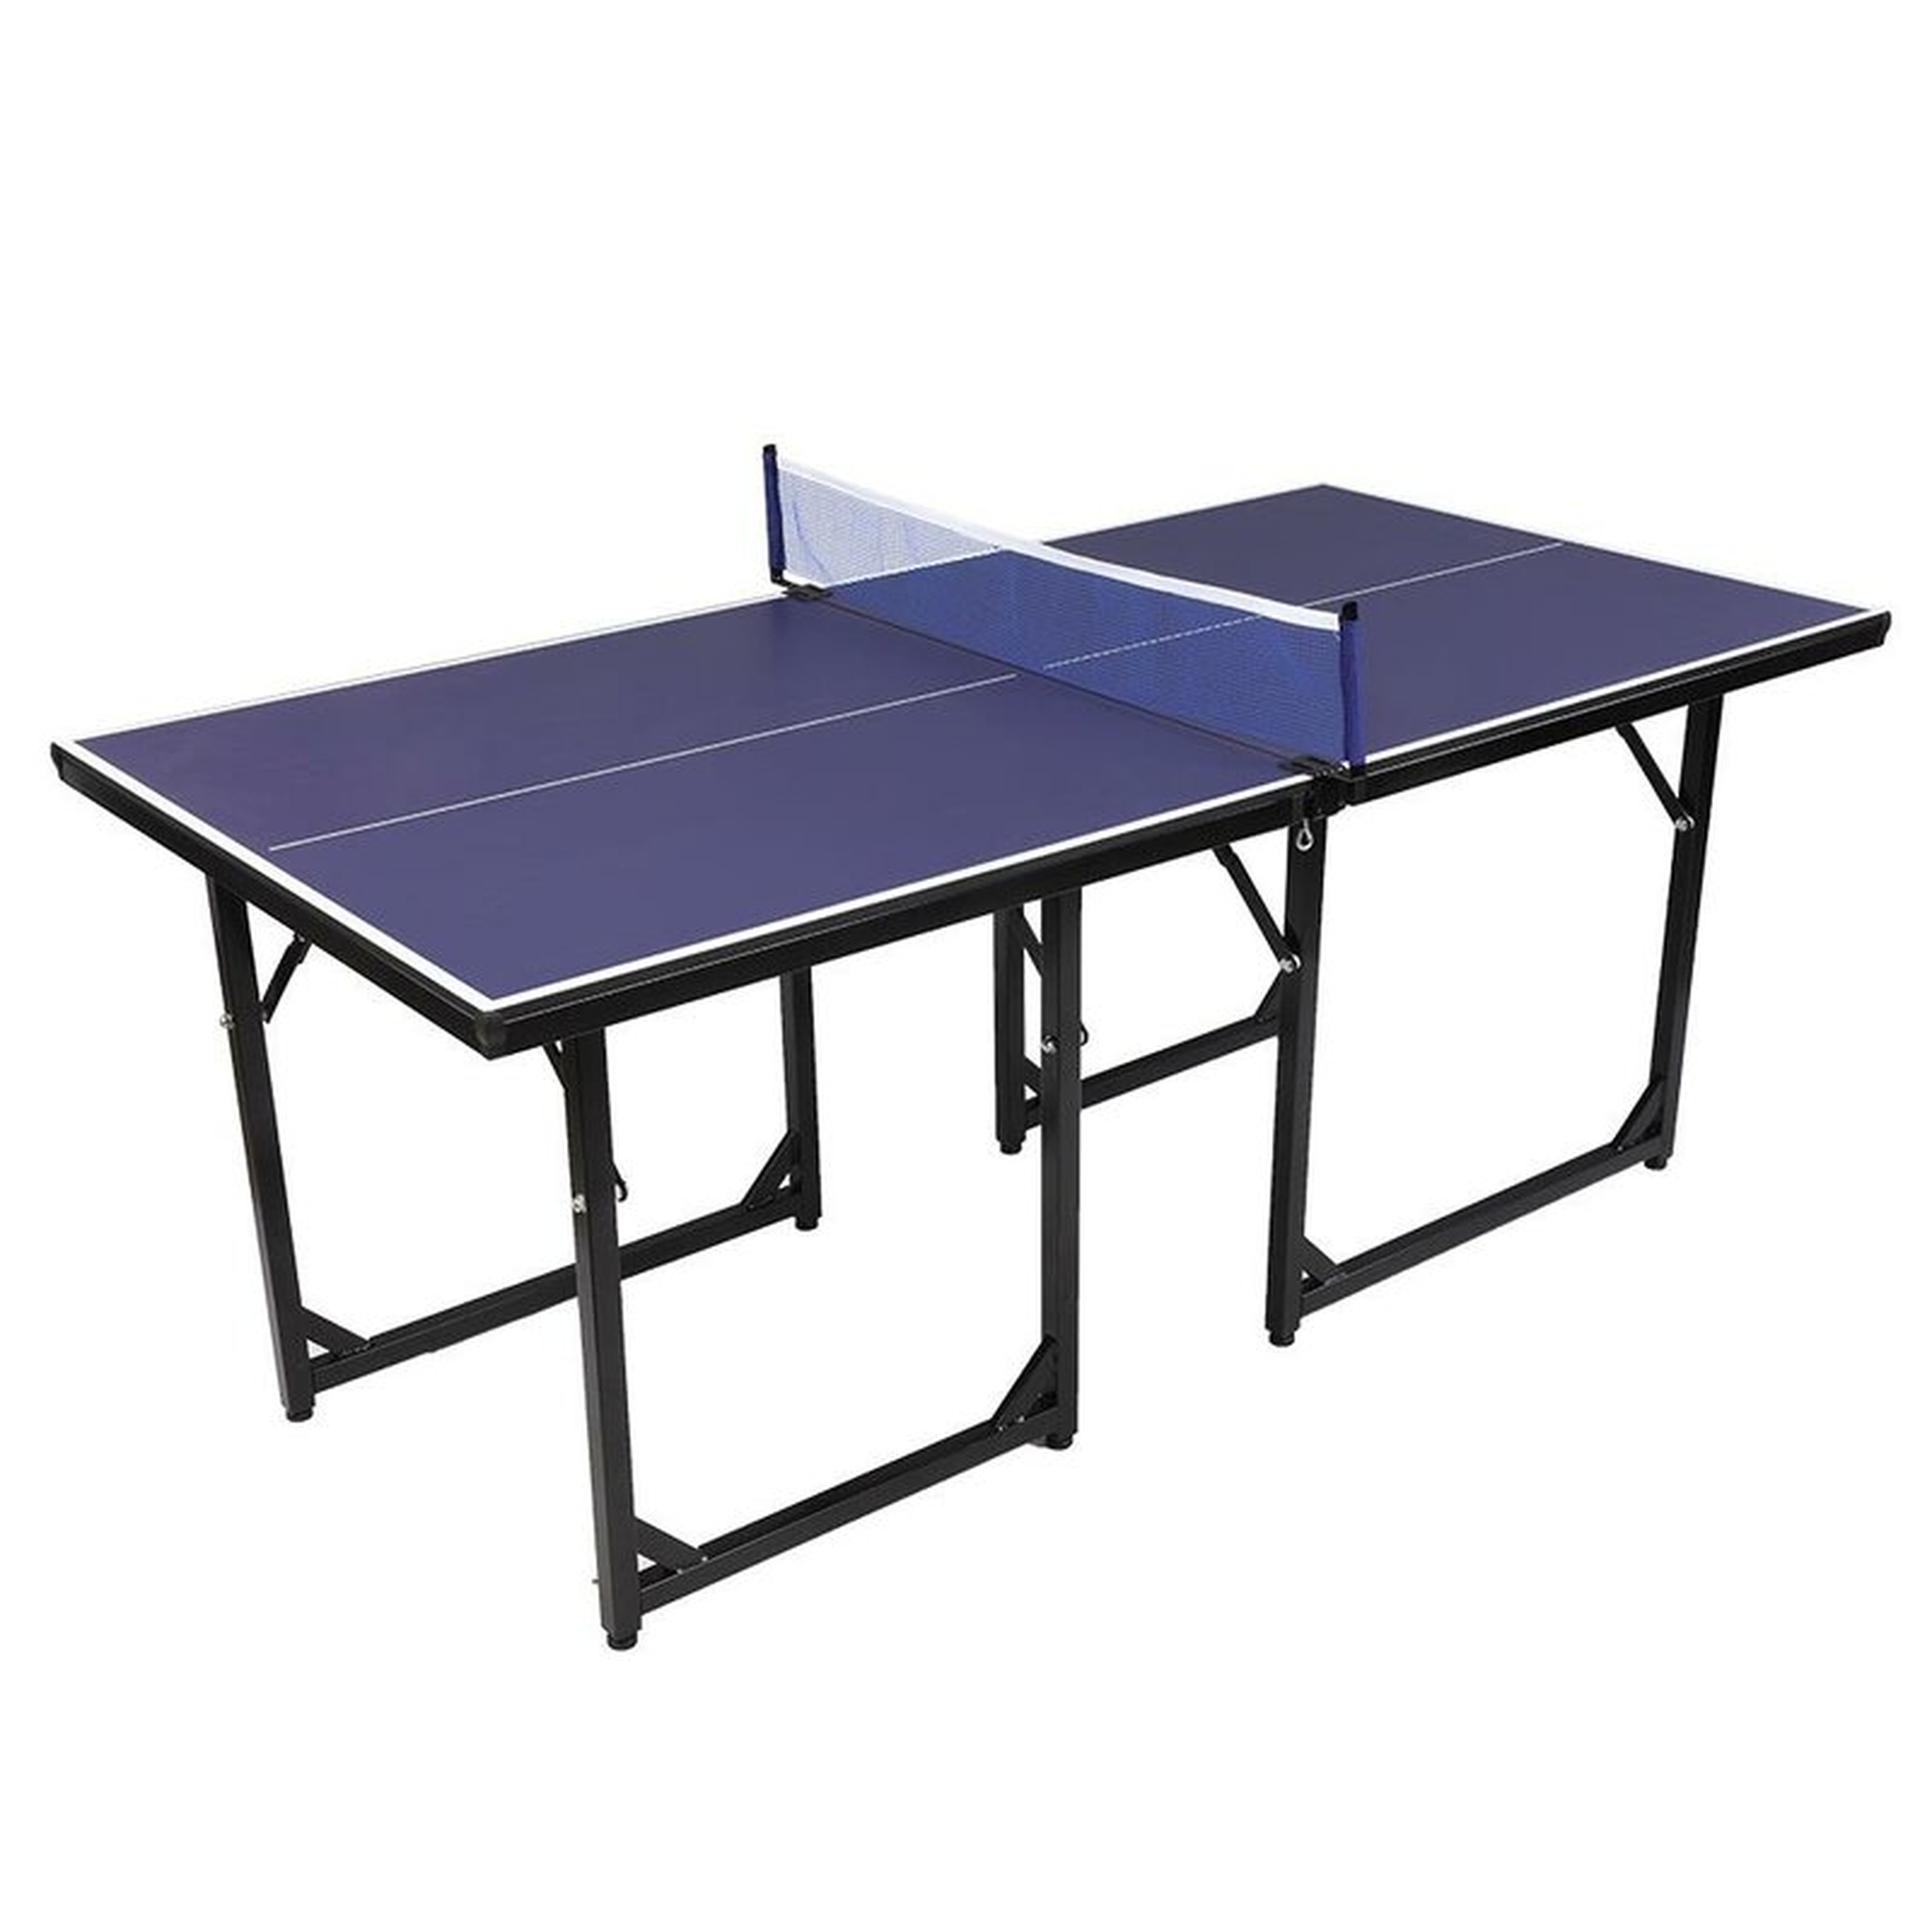 Sports Foldable Indoor/Outdoor Conference Table Tennis Table - Wayfair